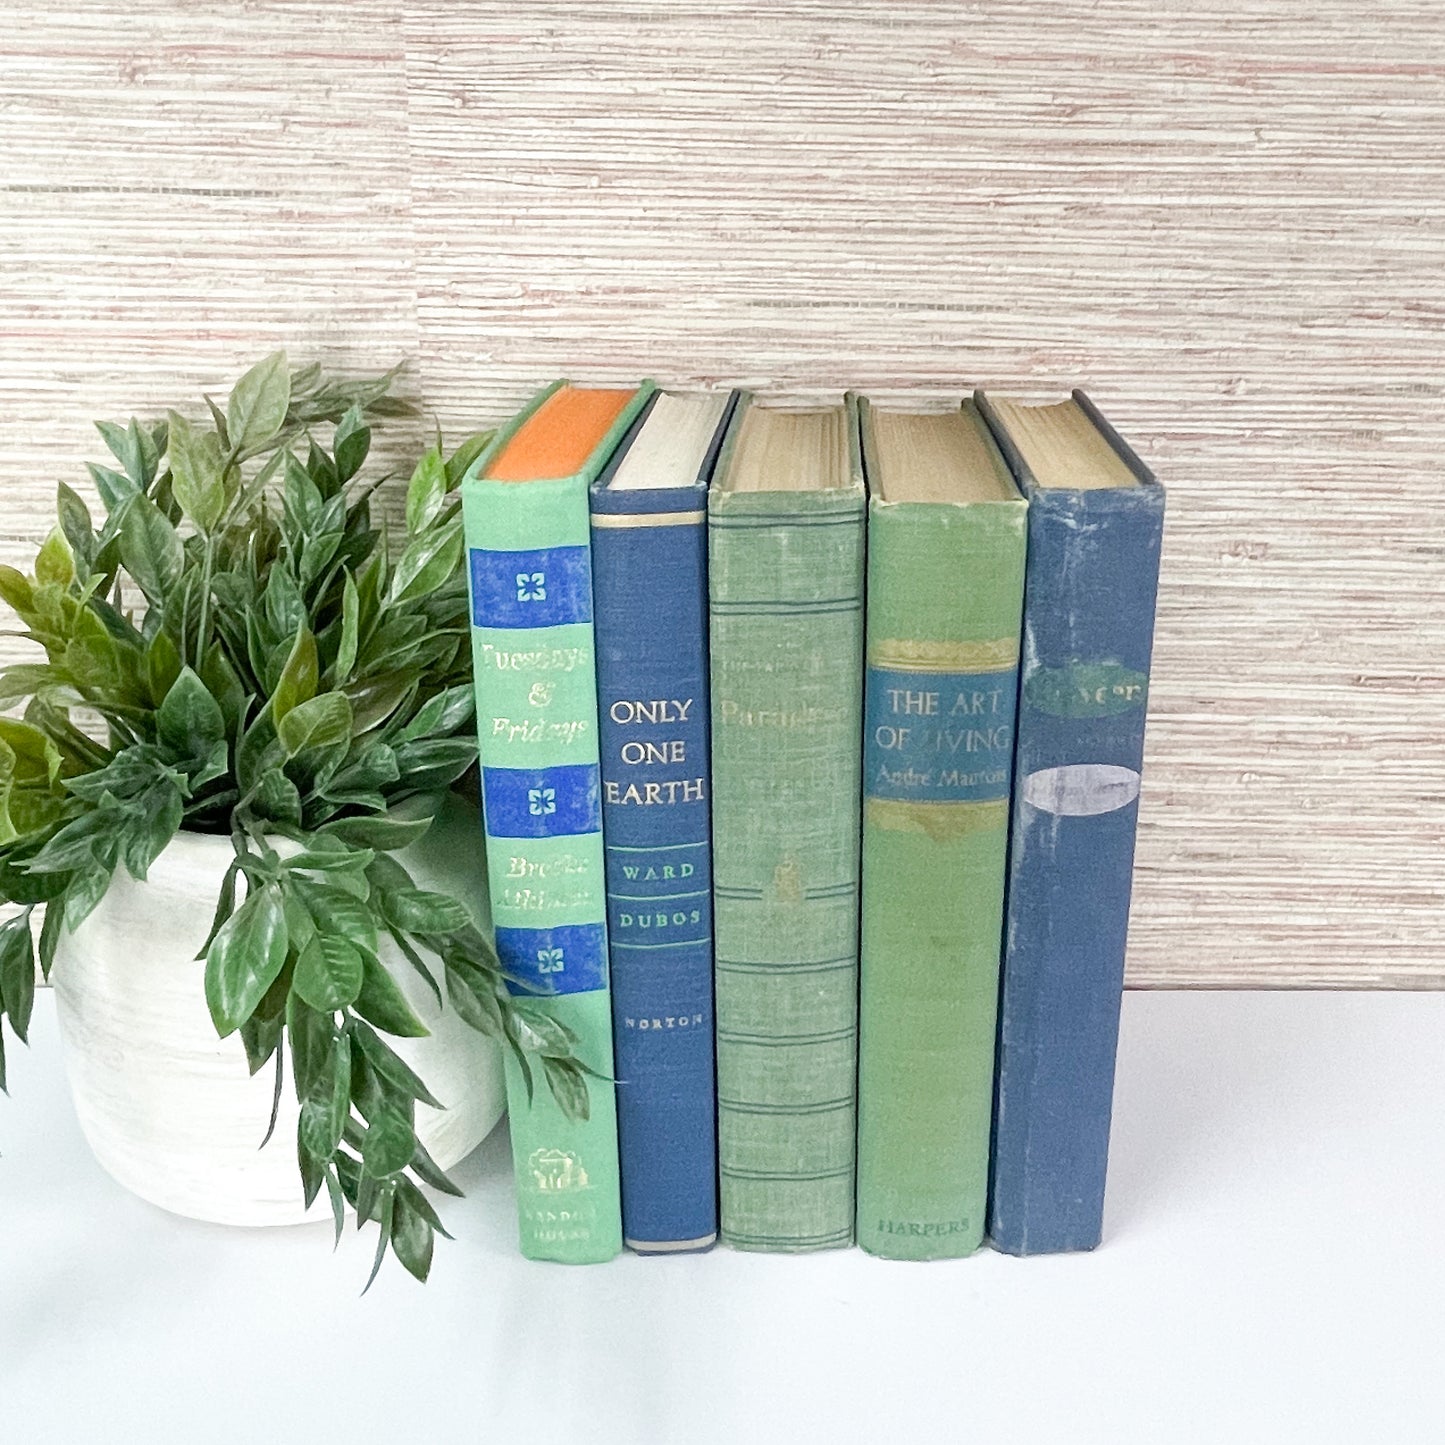 Green and Blue Vintage Books for Home Decor